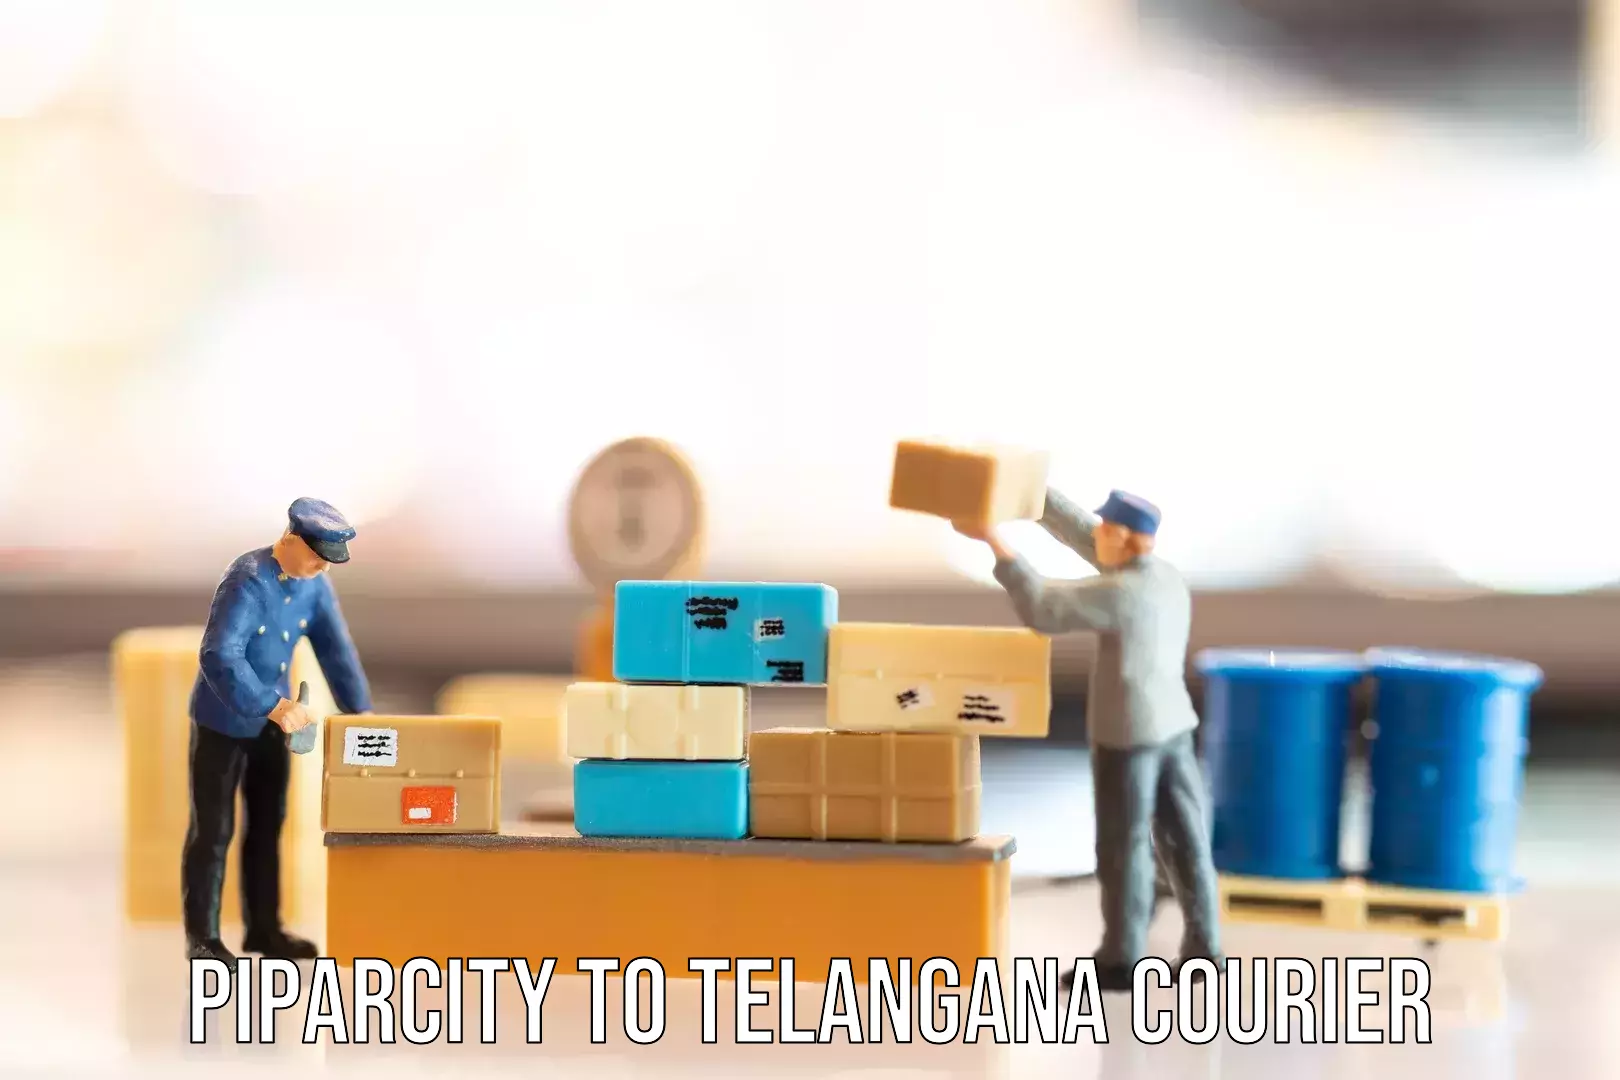 Baggage transport innovation Piparcity to Telangana